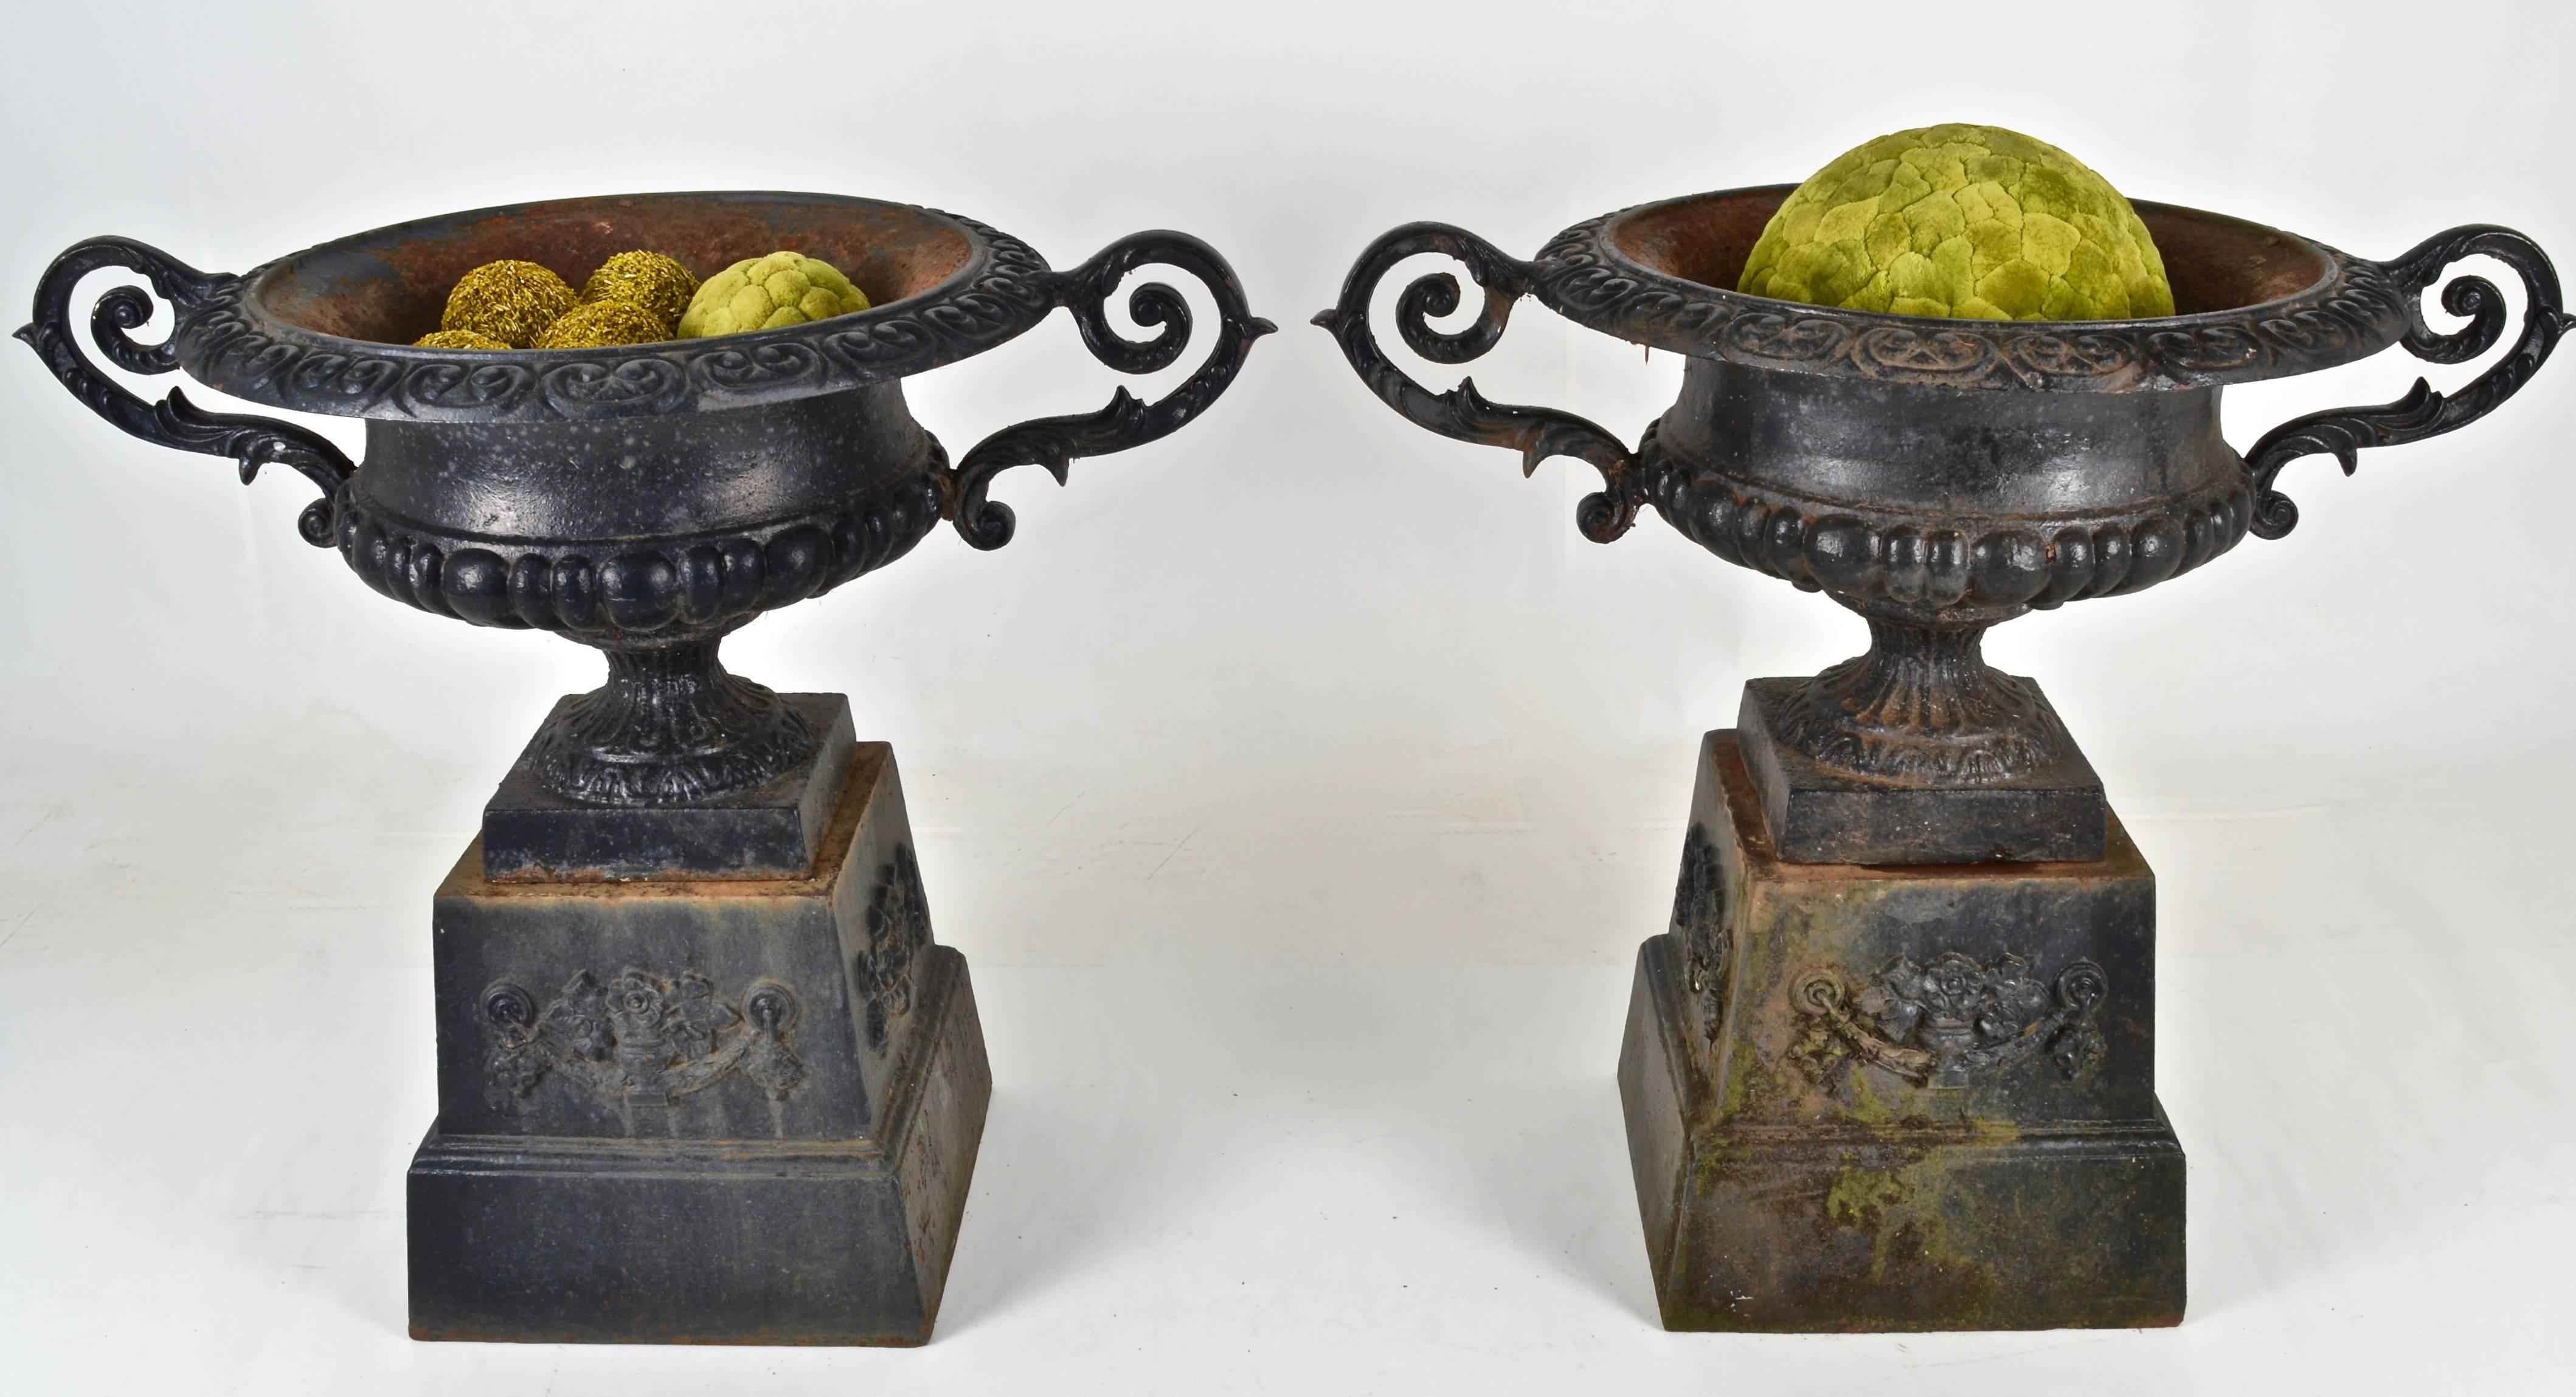 Classic Victorian design urns. Great quality in fine vintage condition. Each piece separates into two parts: base and urn for easier transport. Attractive patina on black paint.